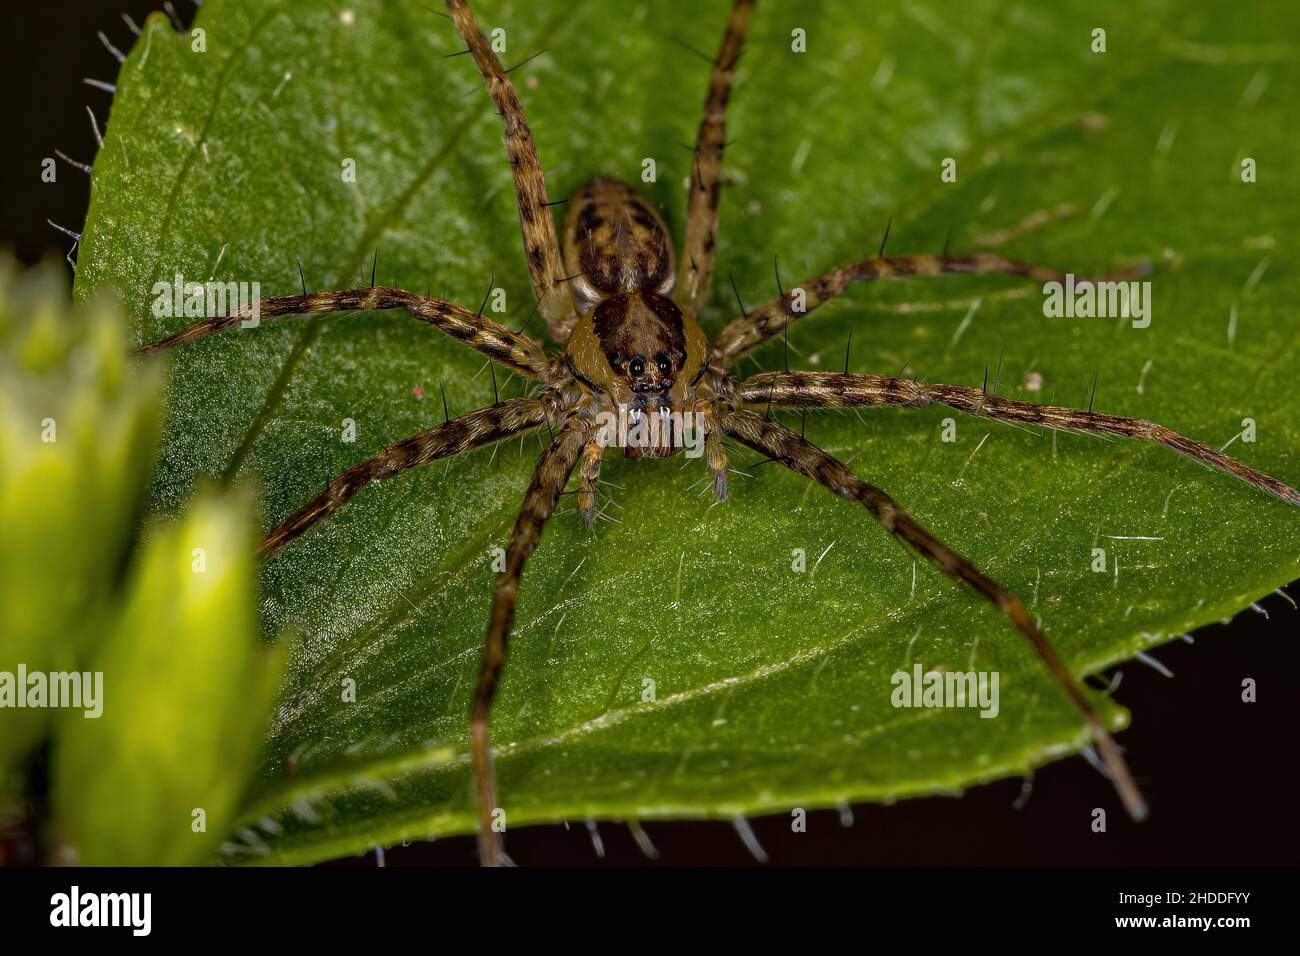 Adult Female Nursery Web Spider of the Family Pisauridae Stock Photo